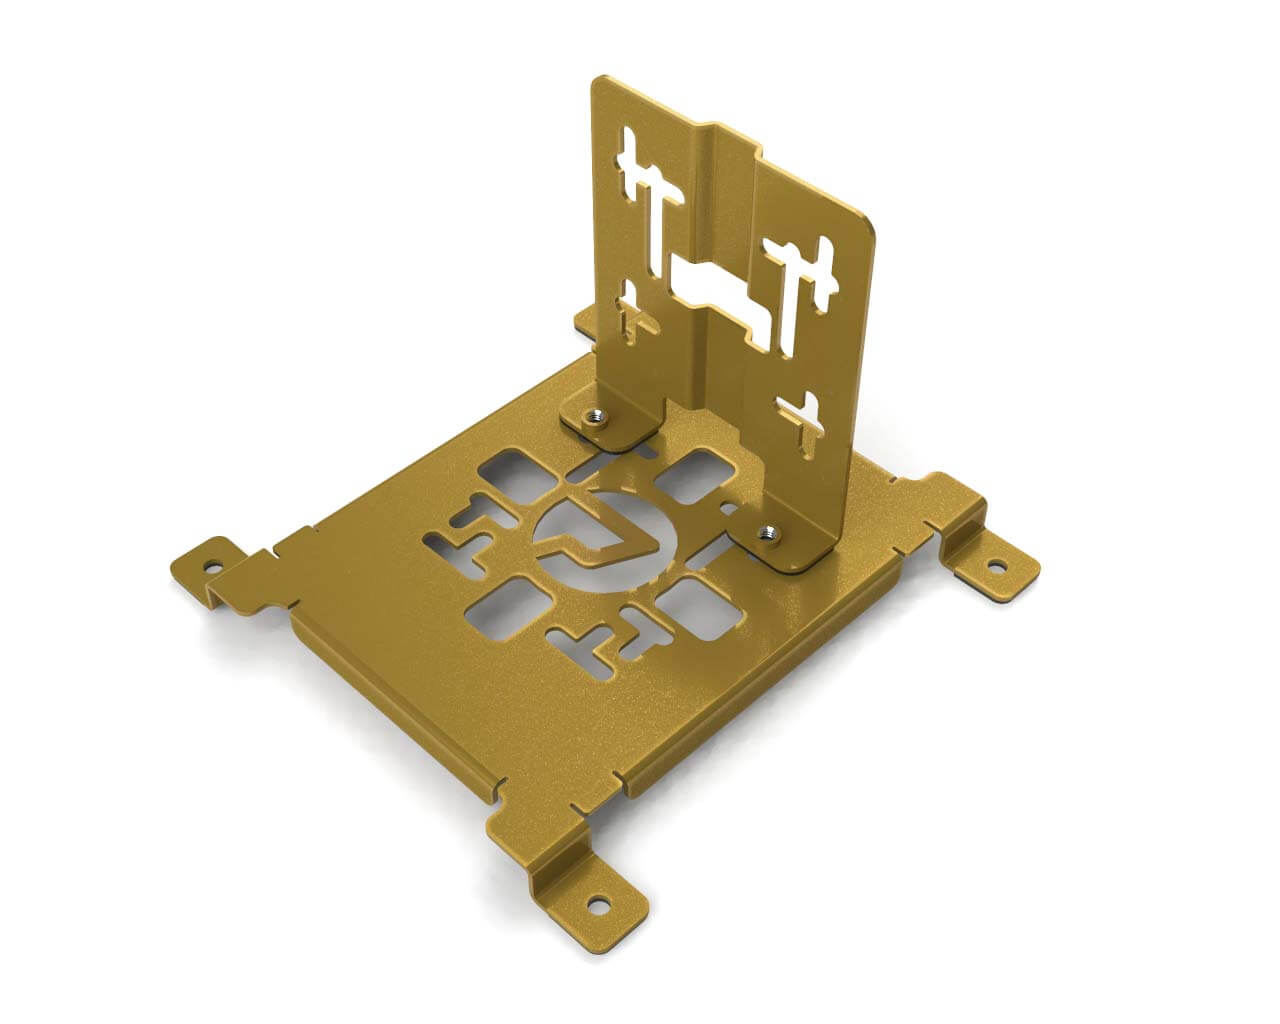 PrimoChill SX Universal Spider Mount Bracket Kit - 140mm Series - PrimoChill - KEEPING IT COOL Gold